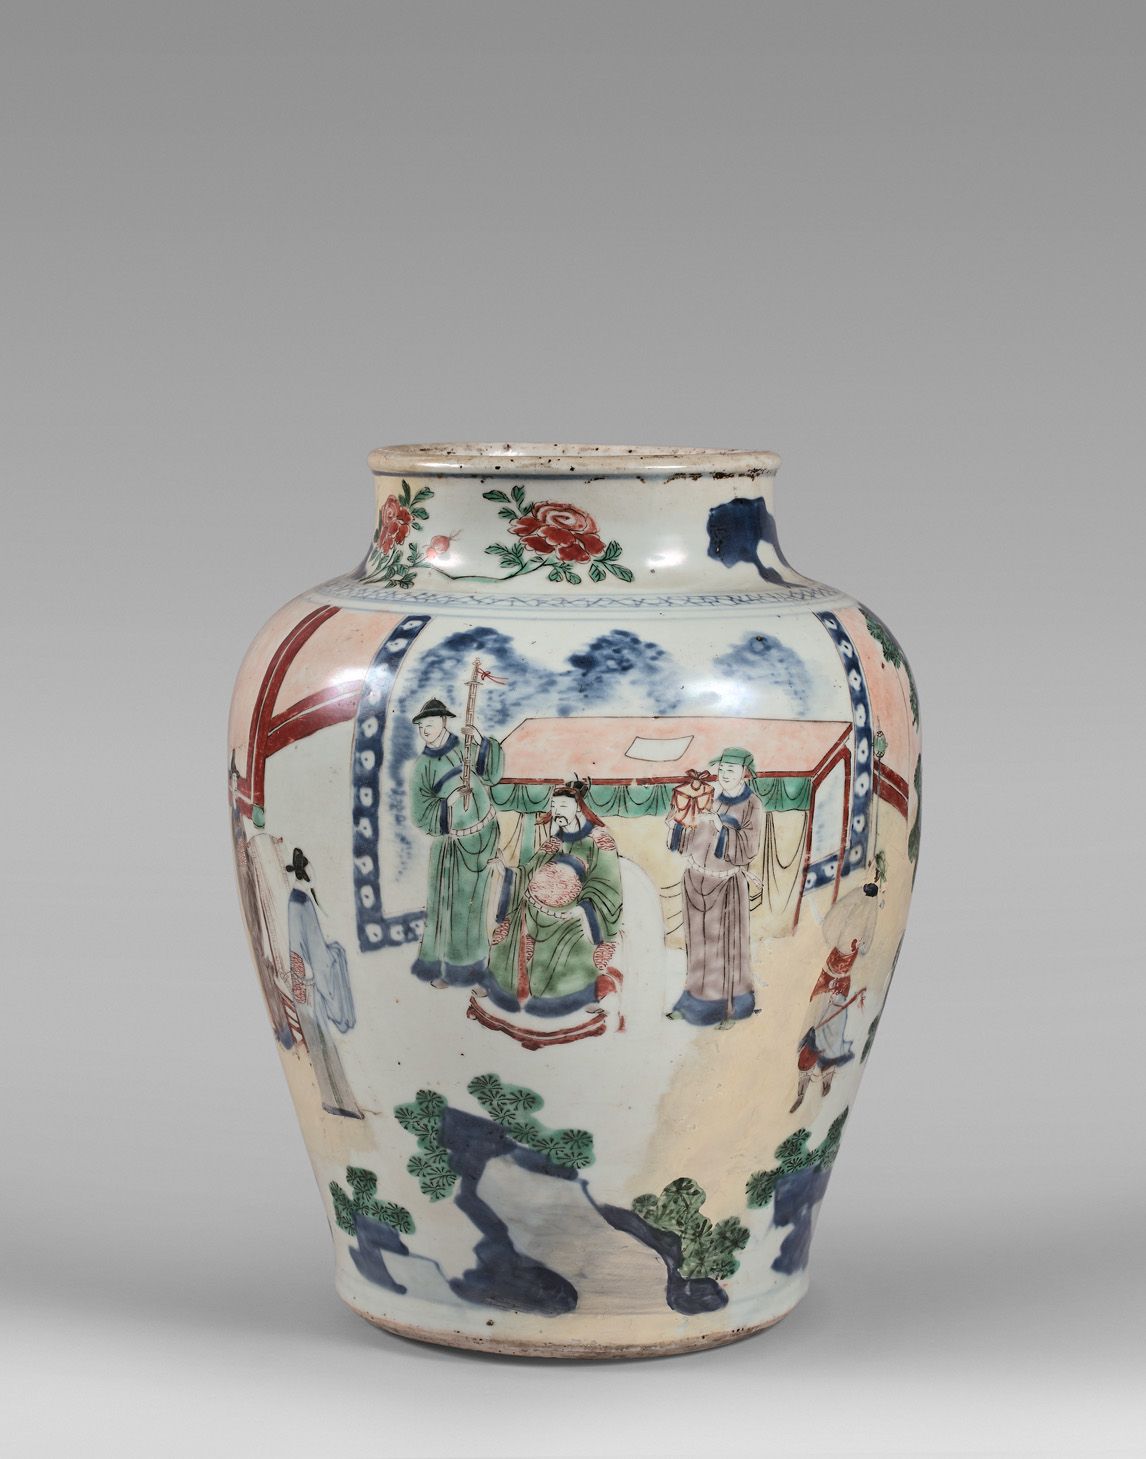 Null Baluster vase in porcelain with polychrome decoration of

characters in a p&hellip;